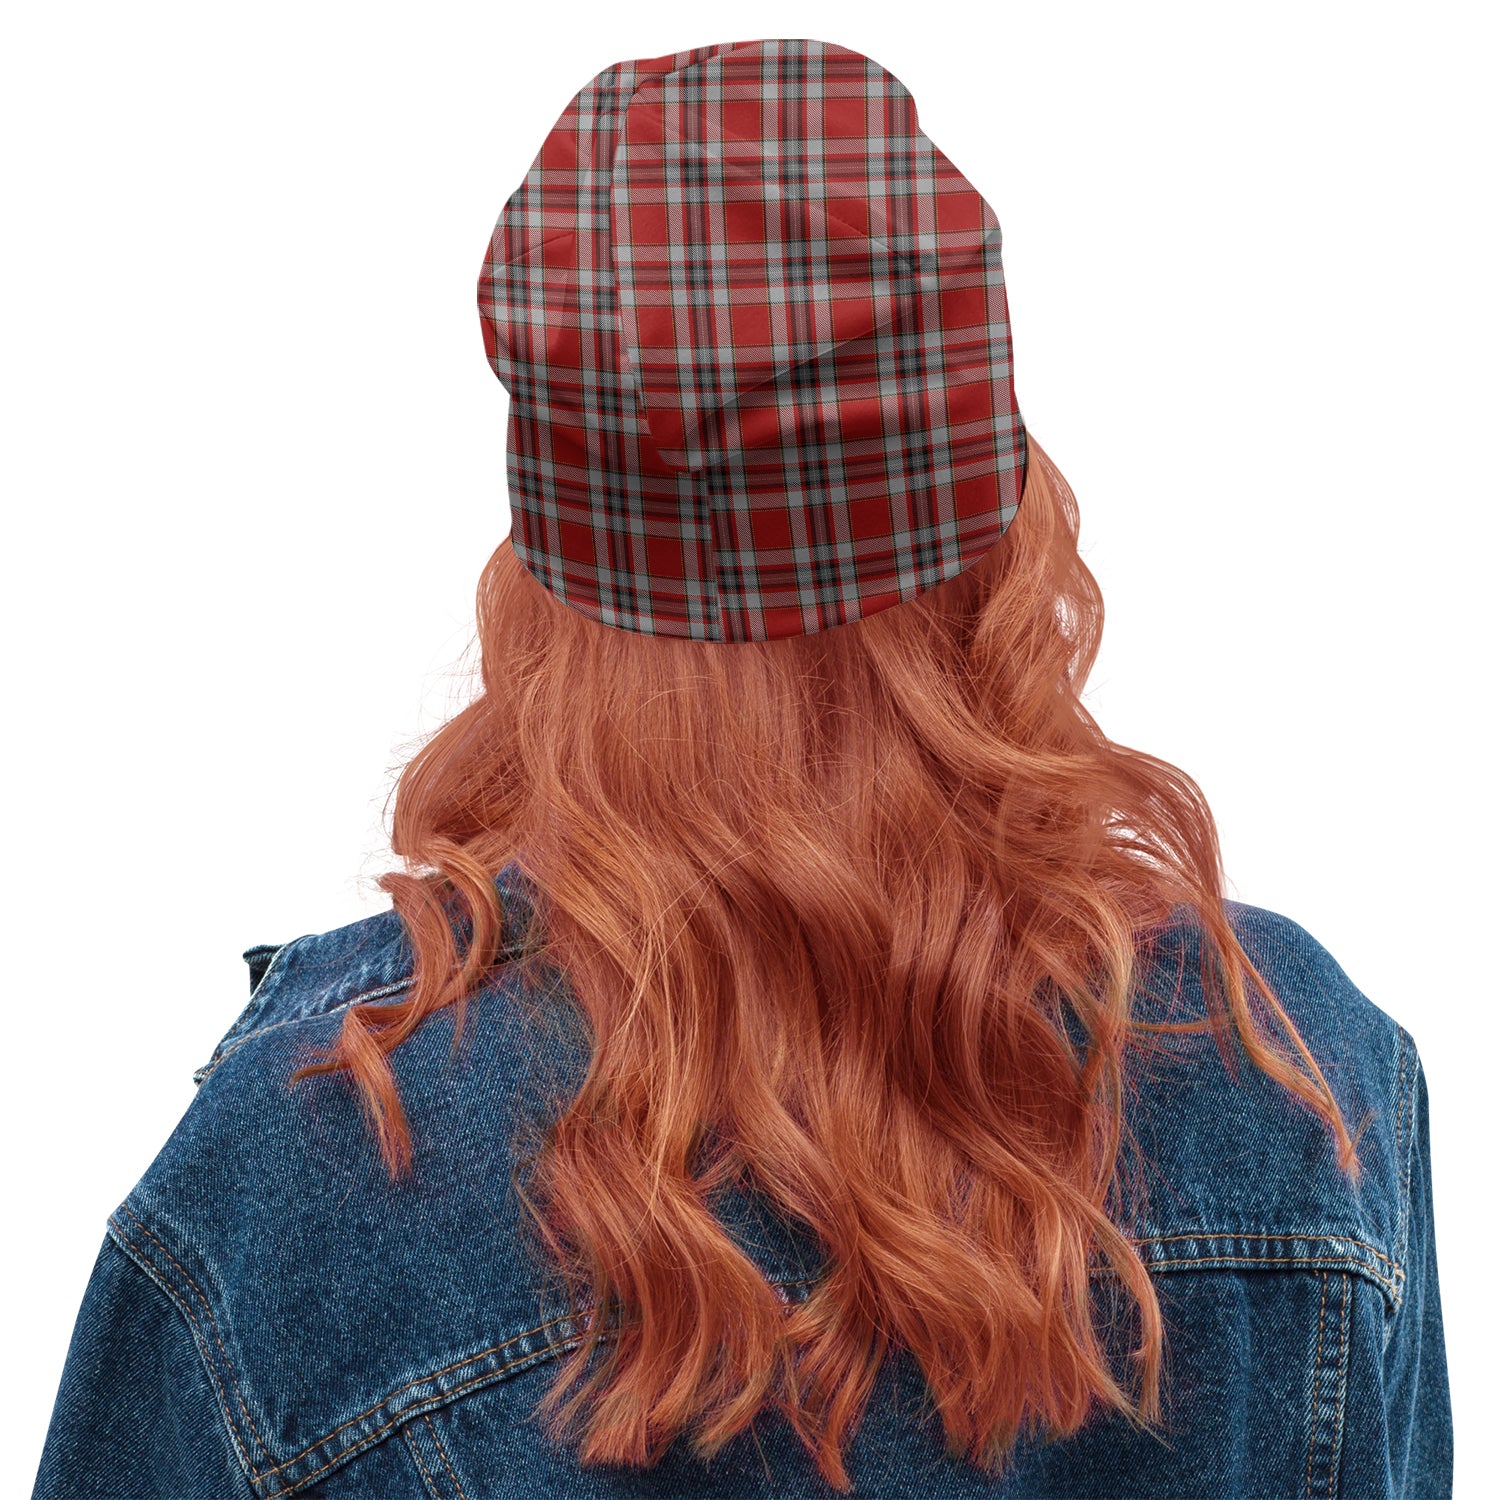 drummond-of-perth-dress-tartan-beanies-hat-with-family-crest